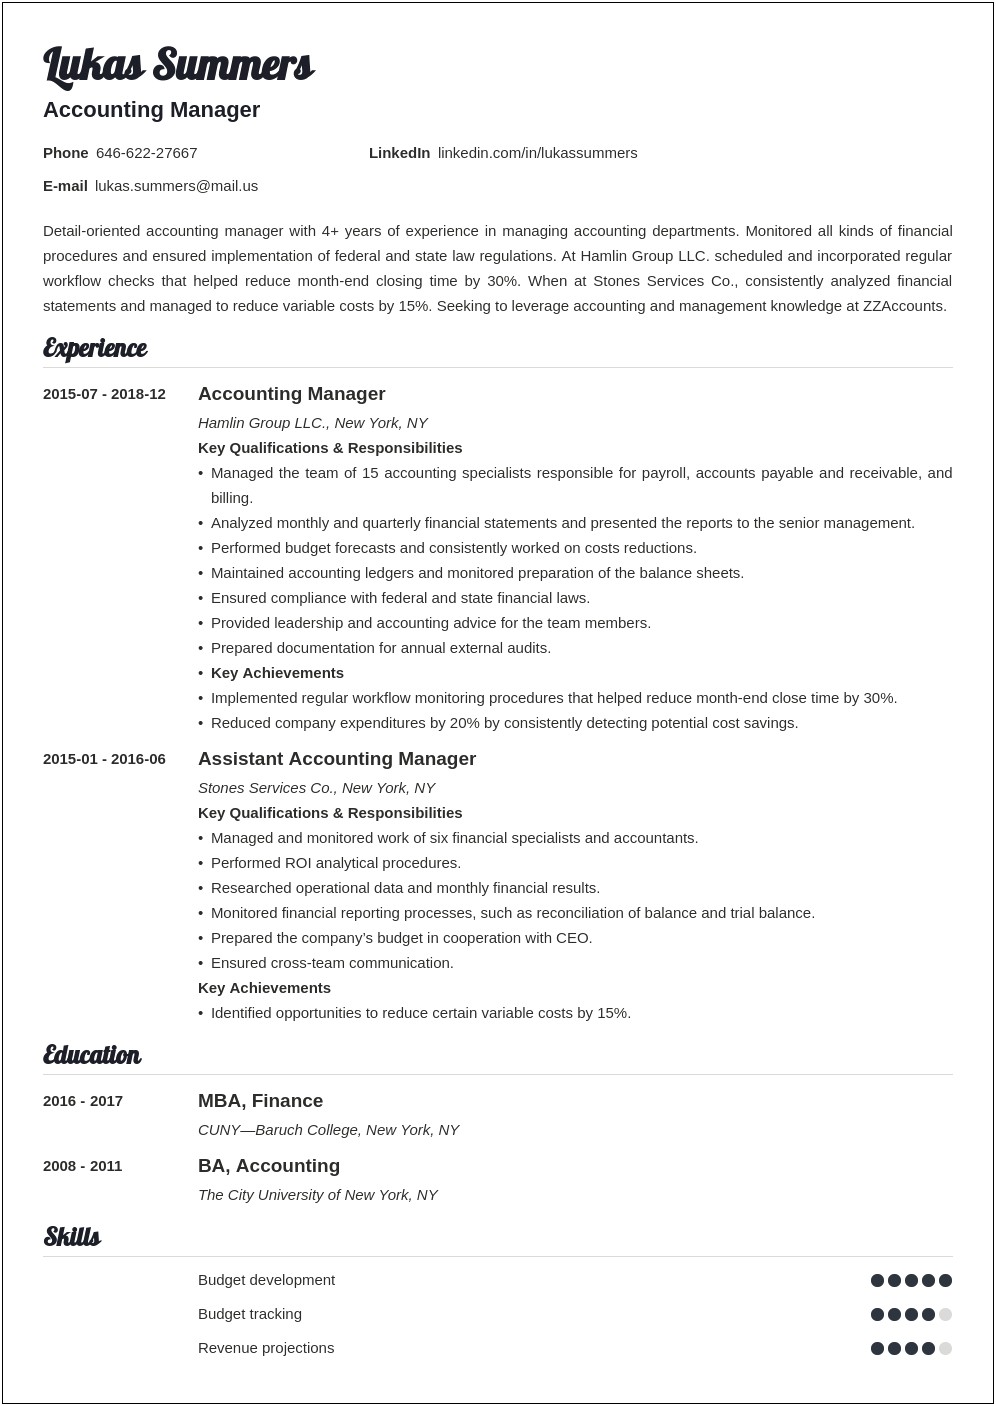 Resume Examples For Accounting Managers